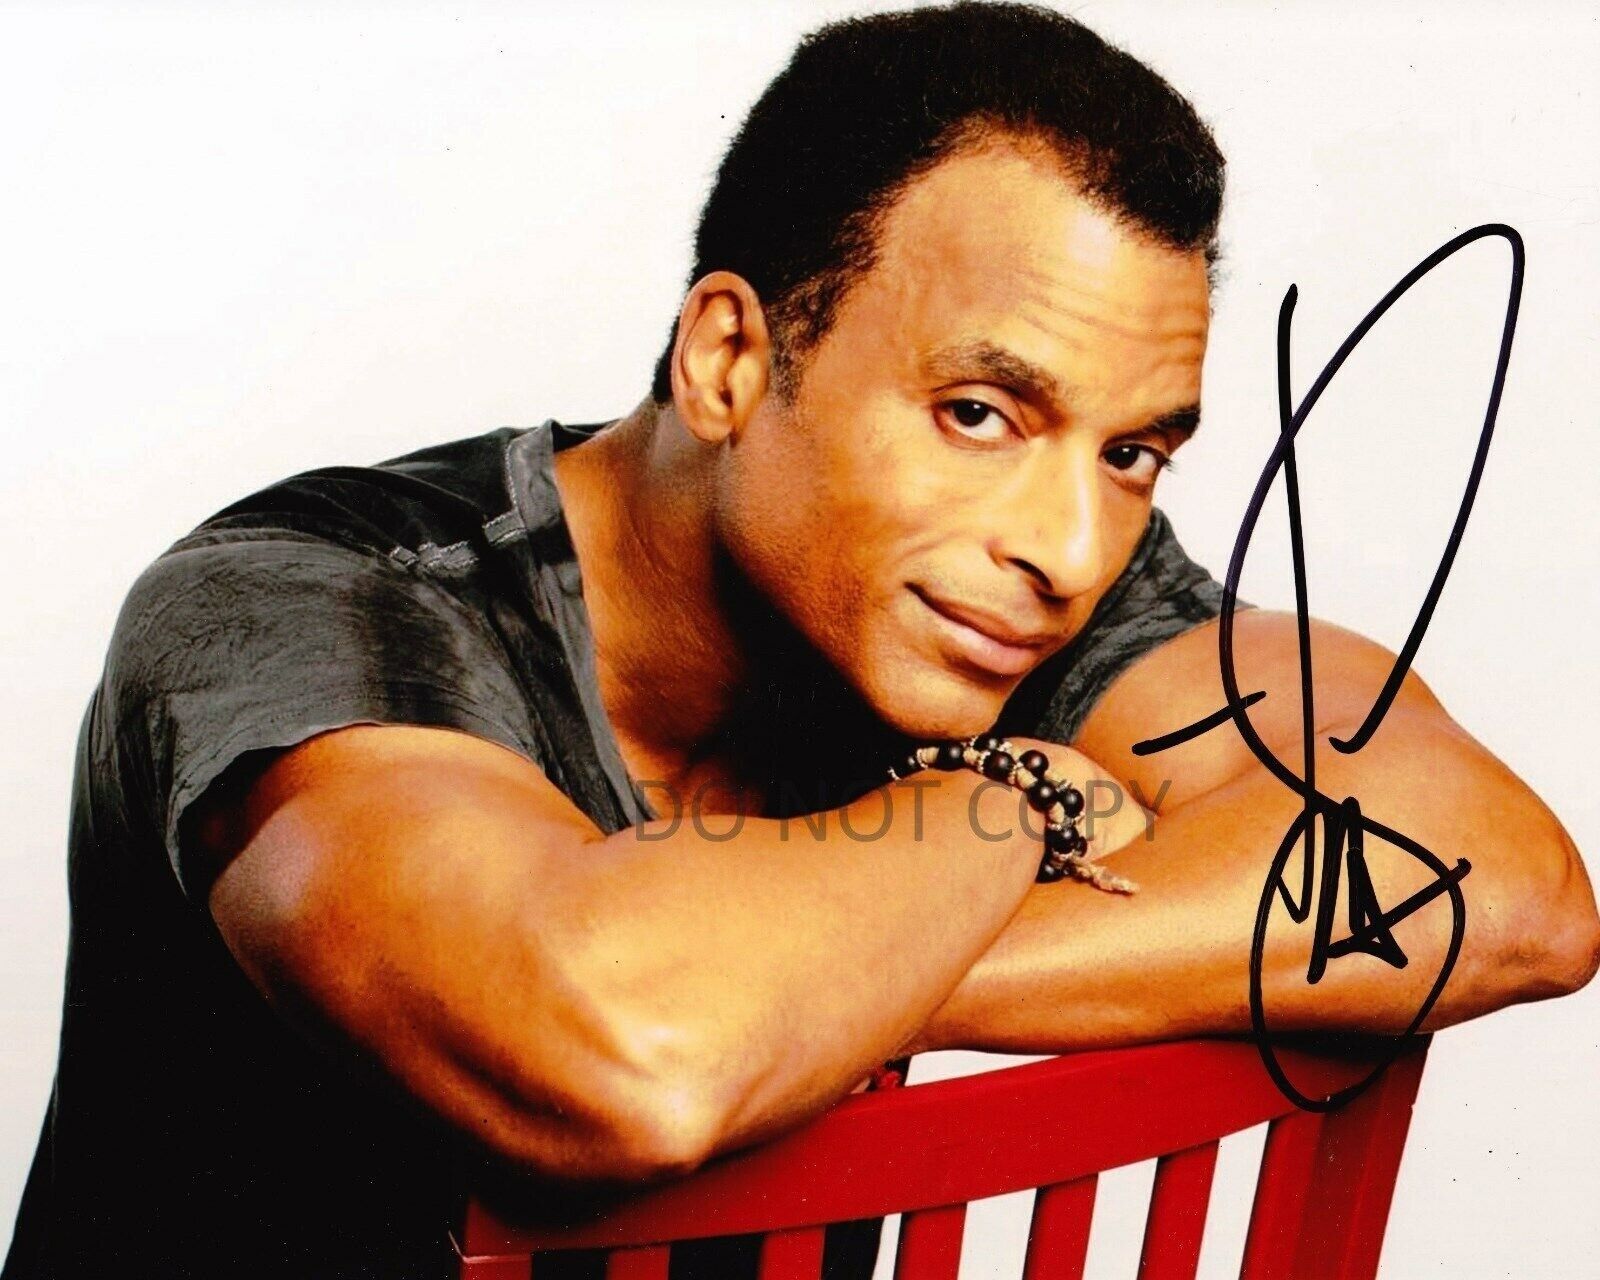 Jon Secada Autographed 8x10 Photo Poster painting Just Another Day Latin Pop Musician REPRINT